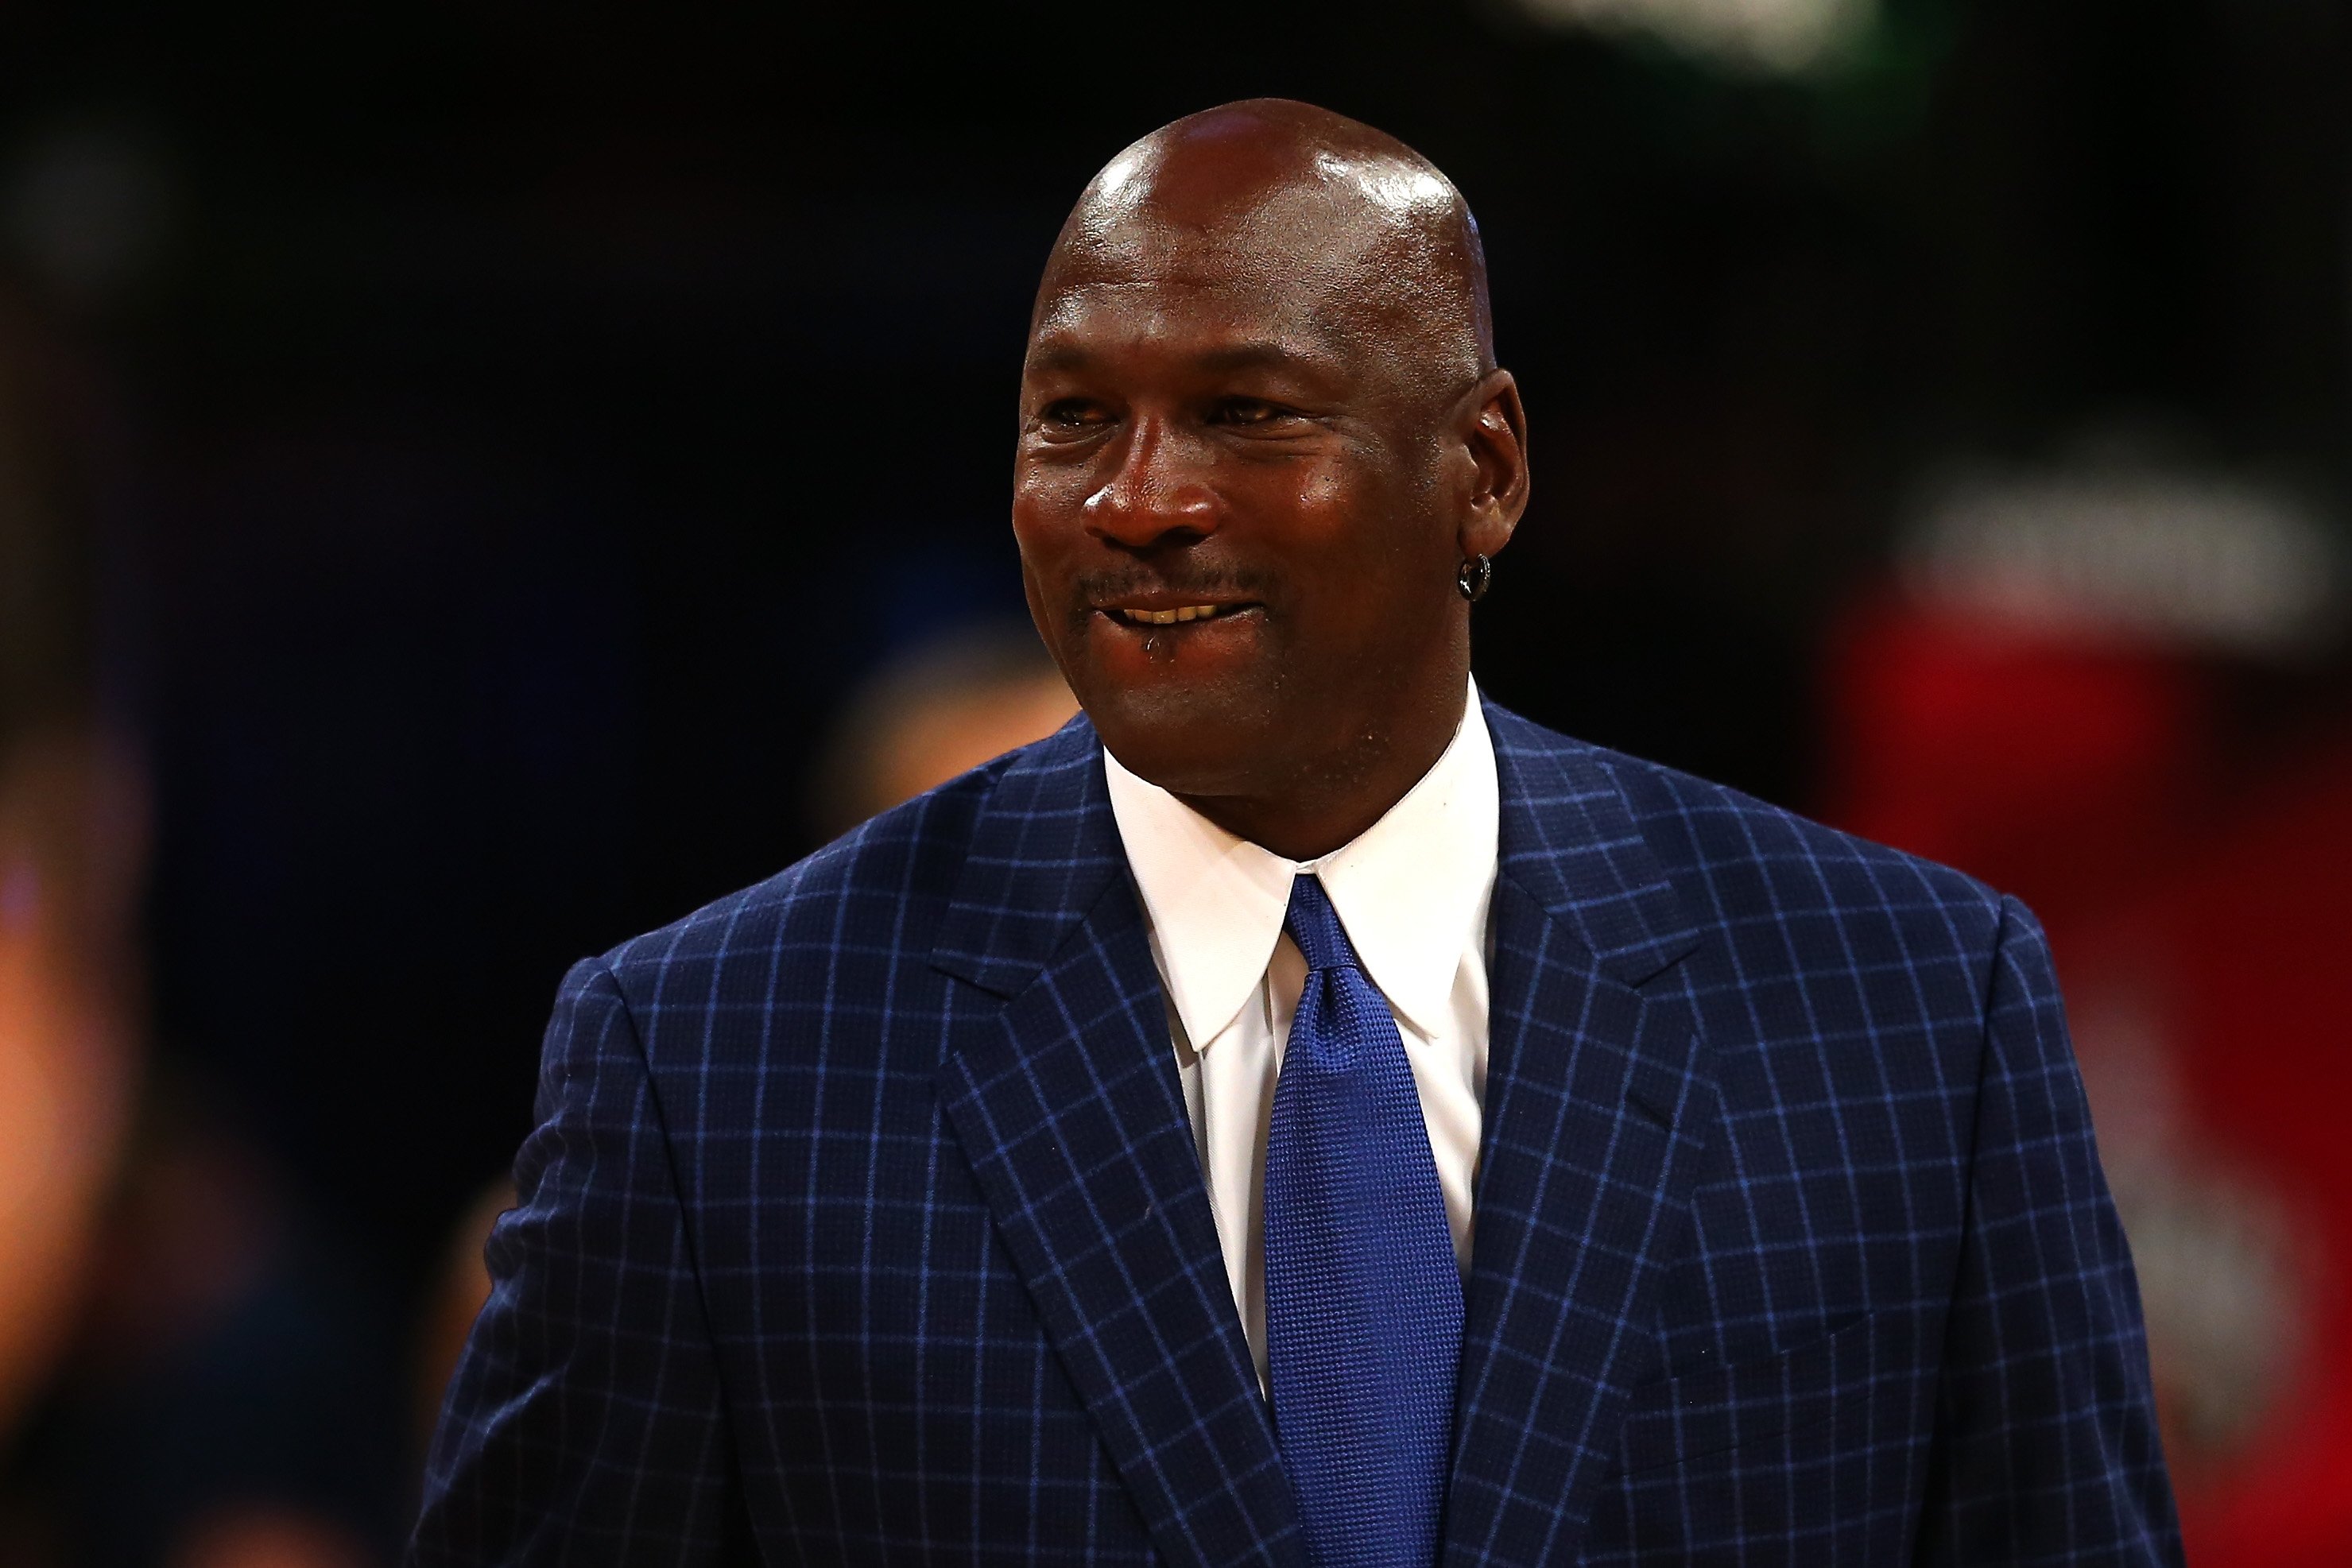 Michael Jordan walks off the court during the NBA All-Star Game 2016 at the Air Canada Center on February 14, 2016 | Photo: Getty Images